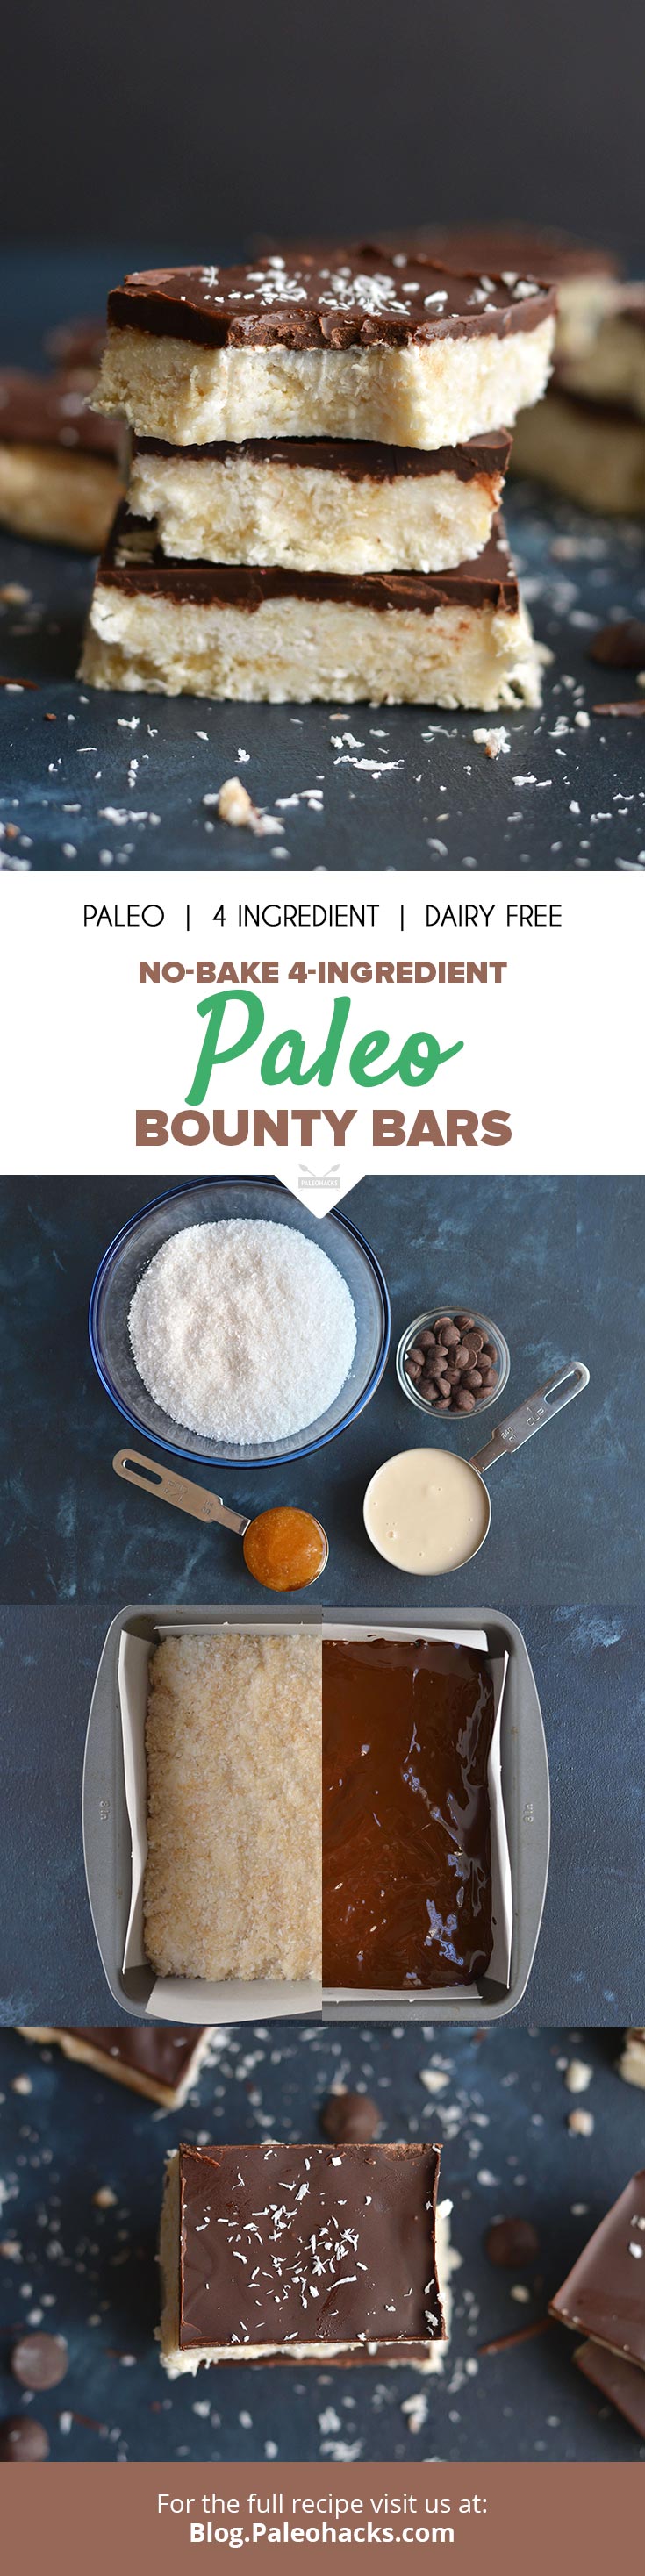 Bite into these Paleo Bounty Bars covered with dark chocolate for a sweet, no-bake treat.